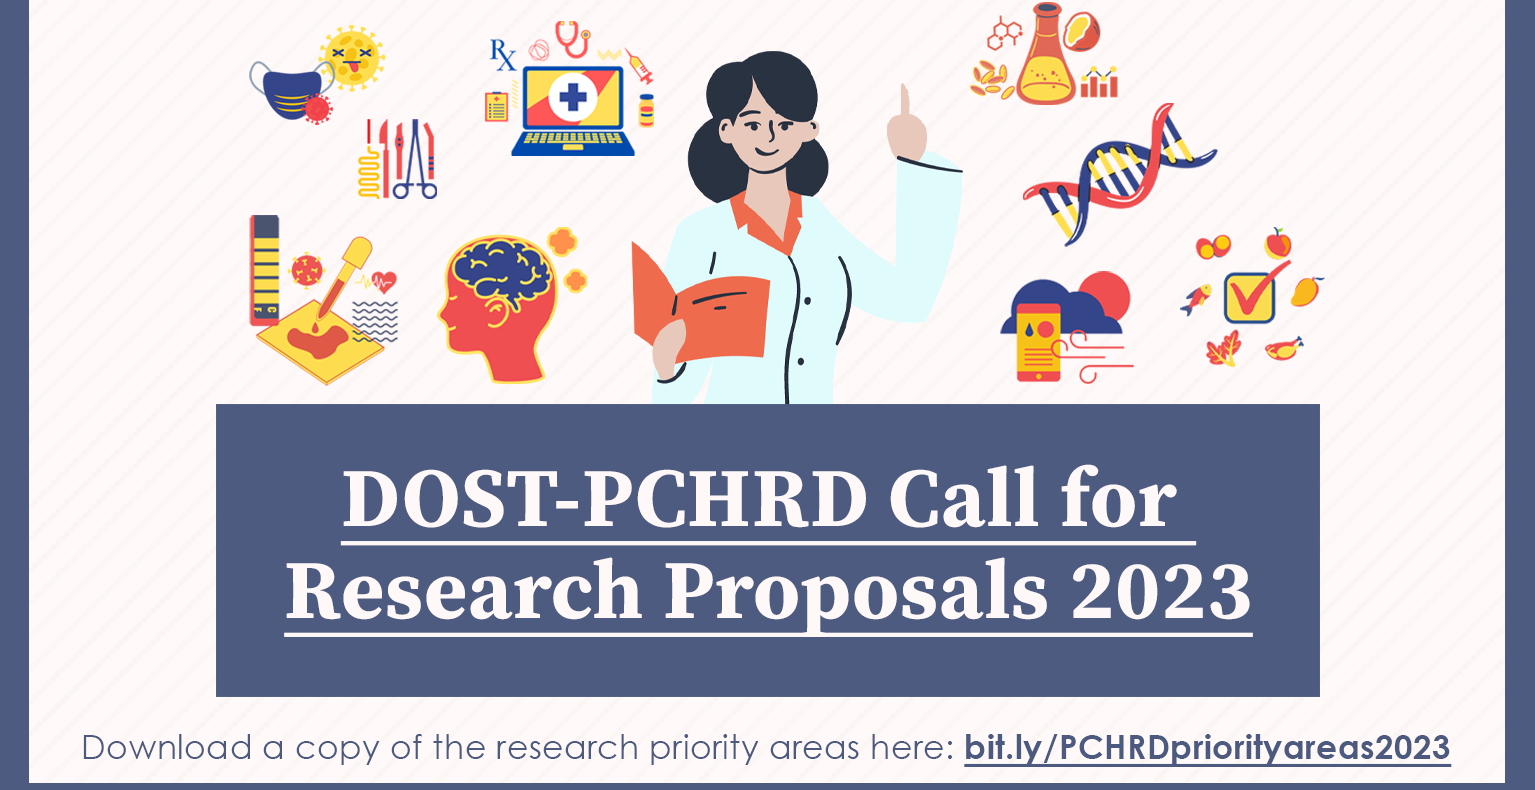 DOST PCHRD Call for Research Proposals 2023